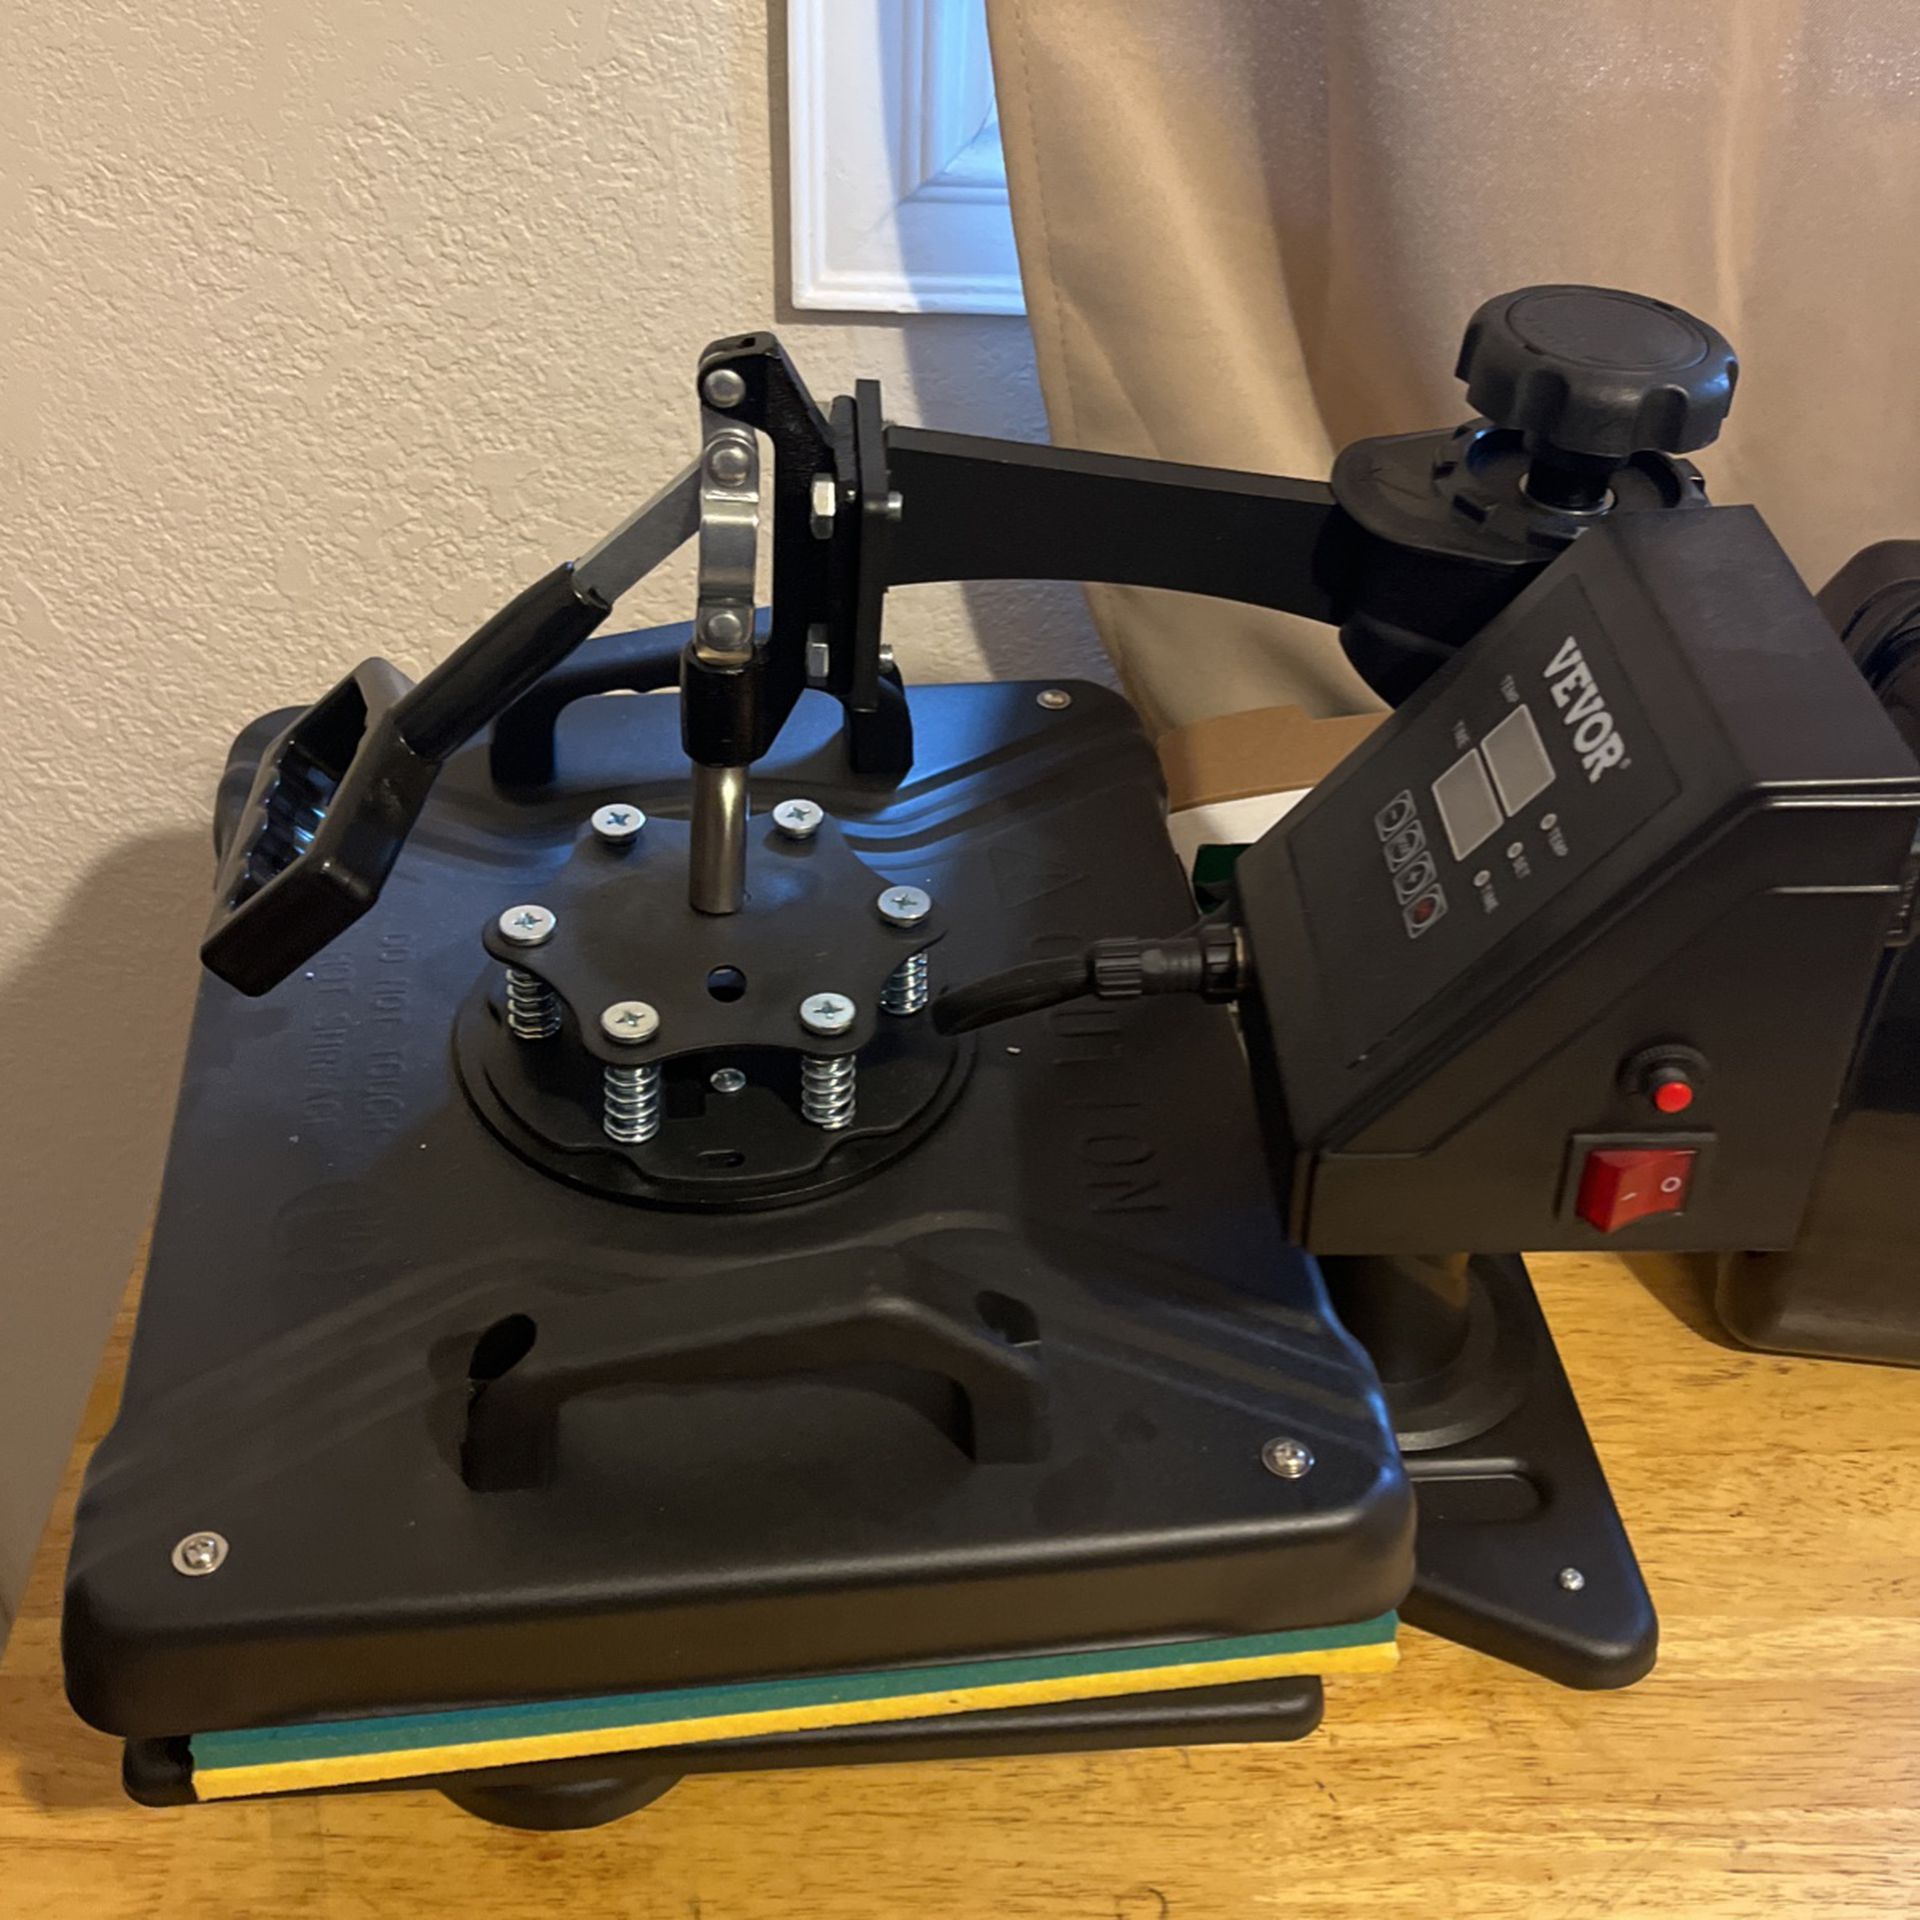 Circuit Heat press 12x10 for Sale in Fresno, CA - OfferUp